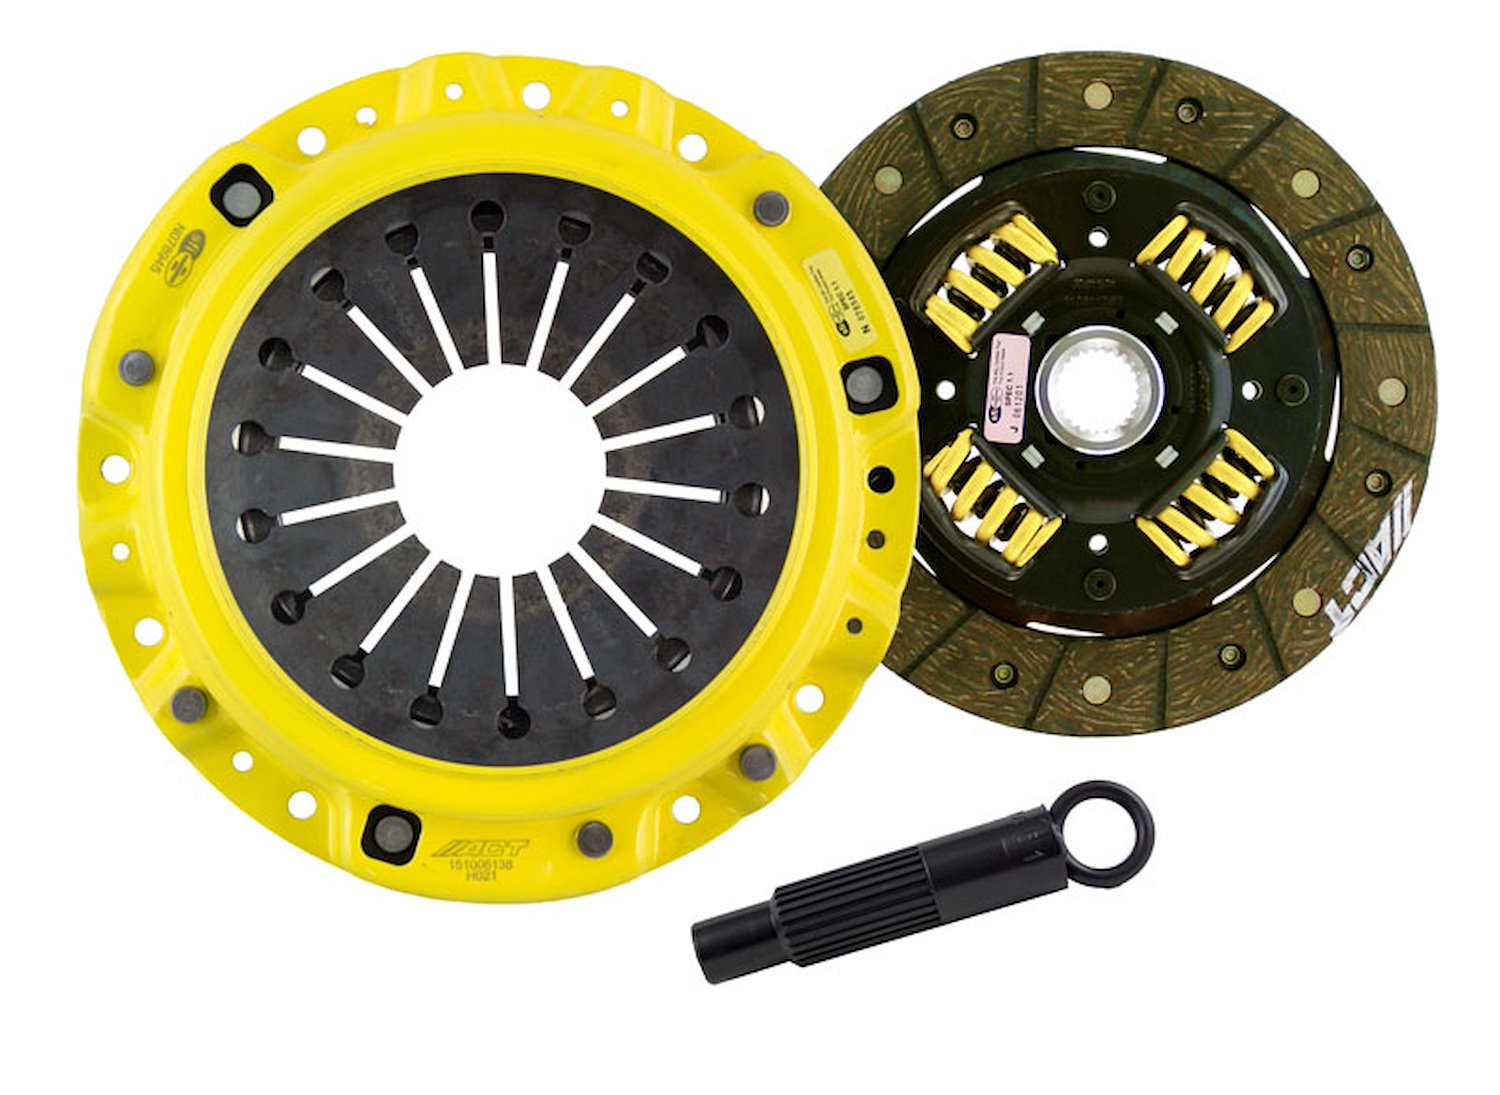 HD/Performance Street Sprung Transmission Clutch Kit Fits Select Acura/Honda